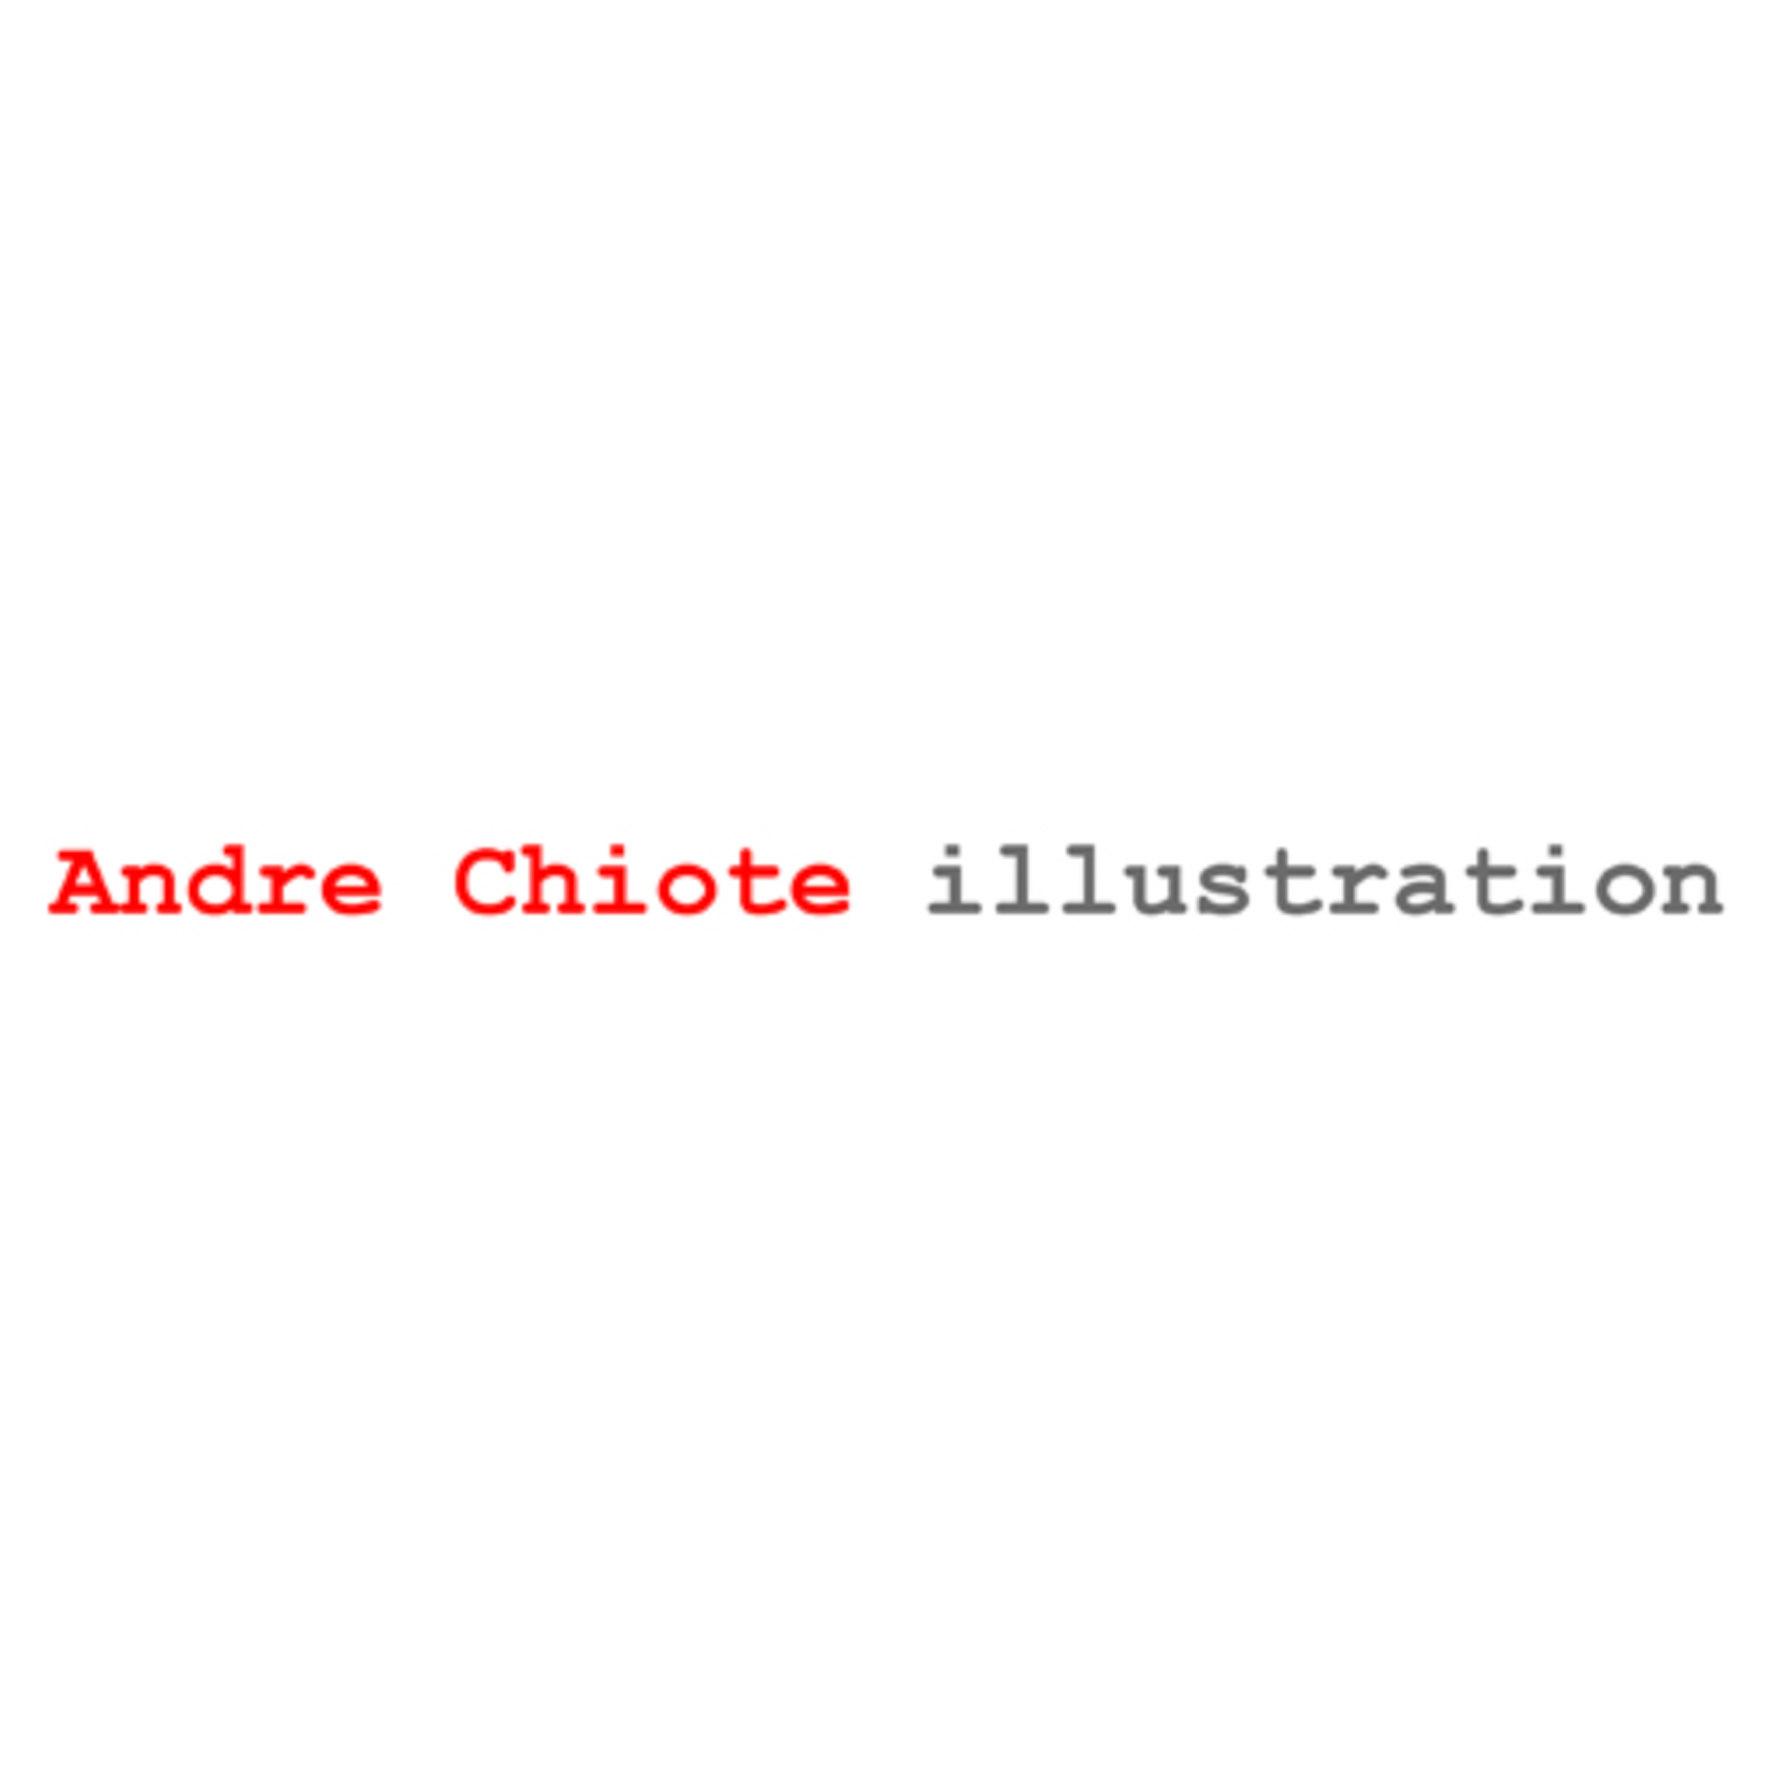 André Chiote